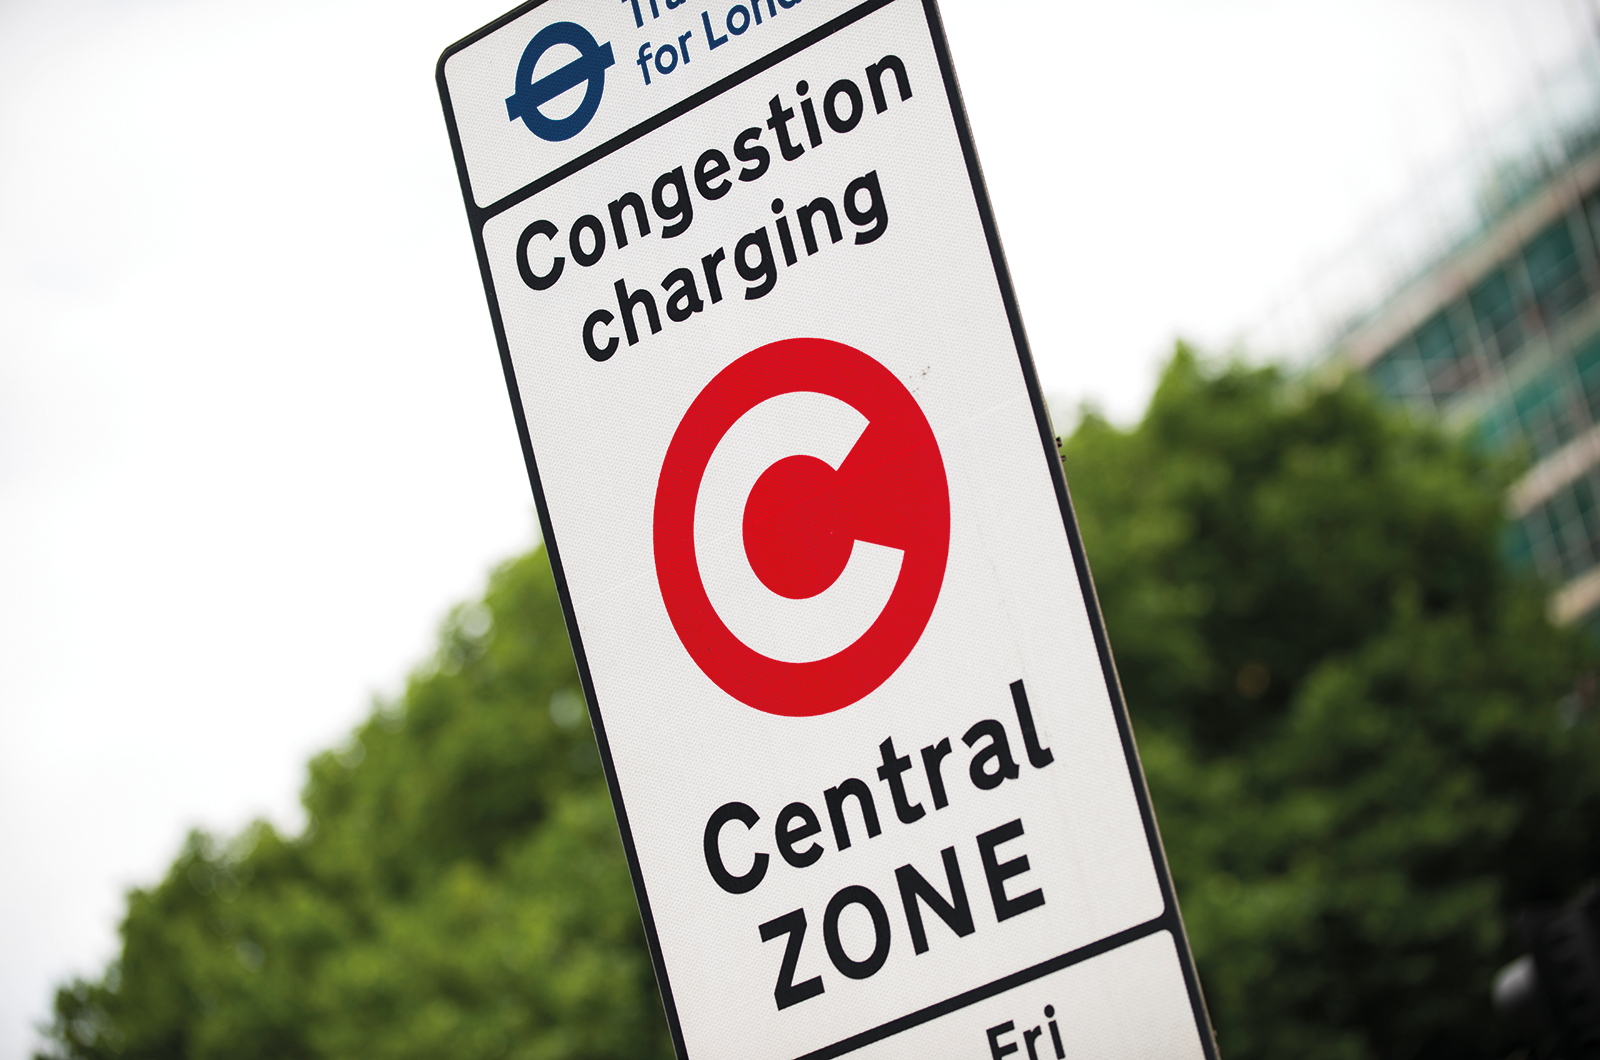 Classic & Sports Car – FIVA wants action for classic cars in low-emission zones